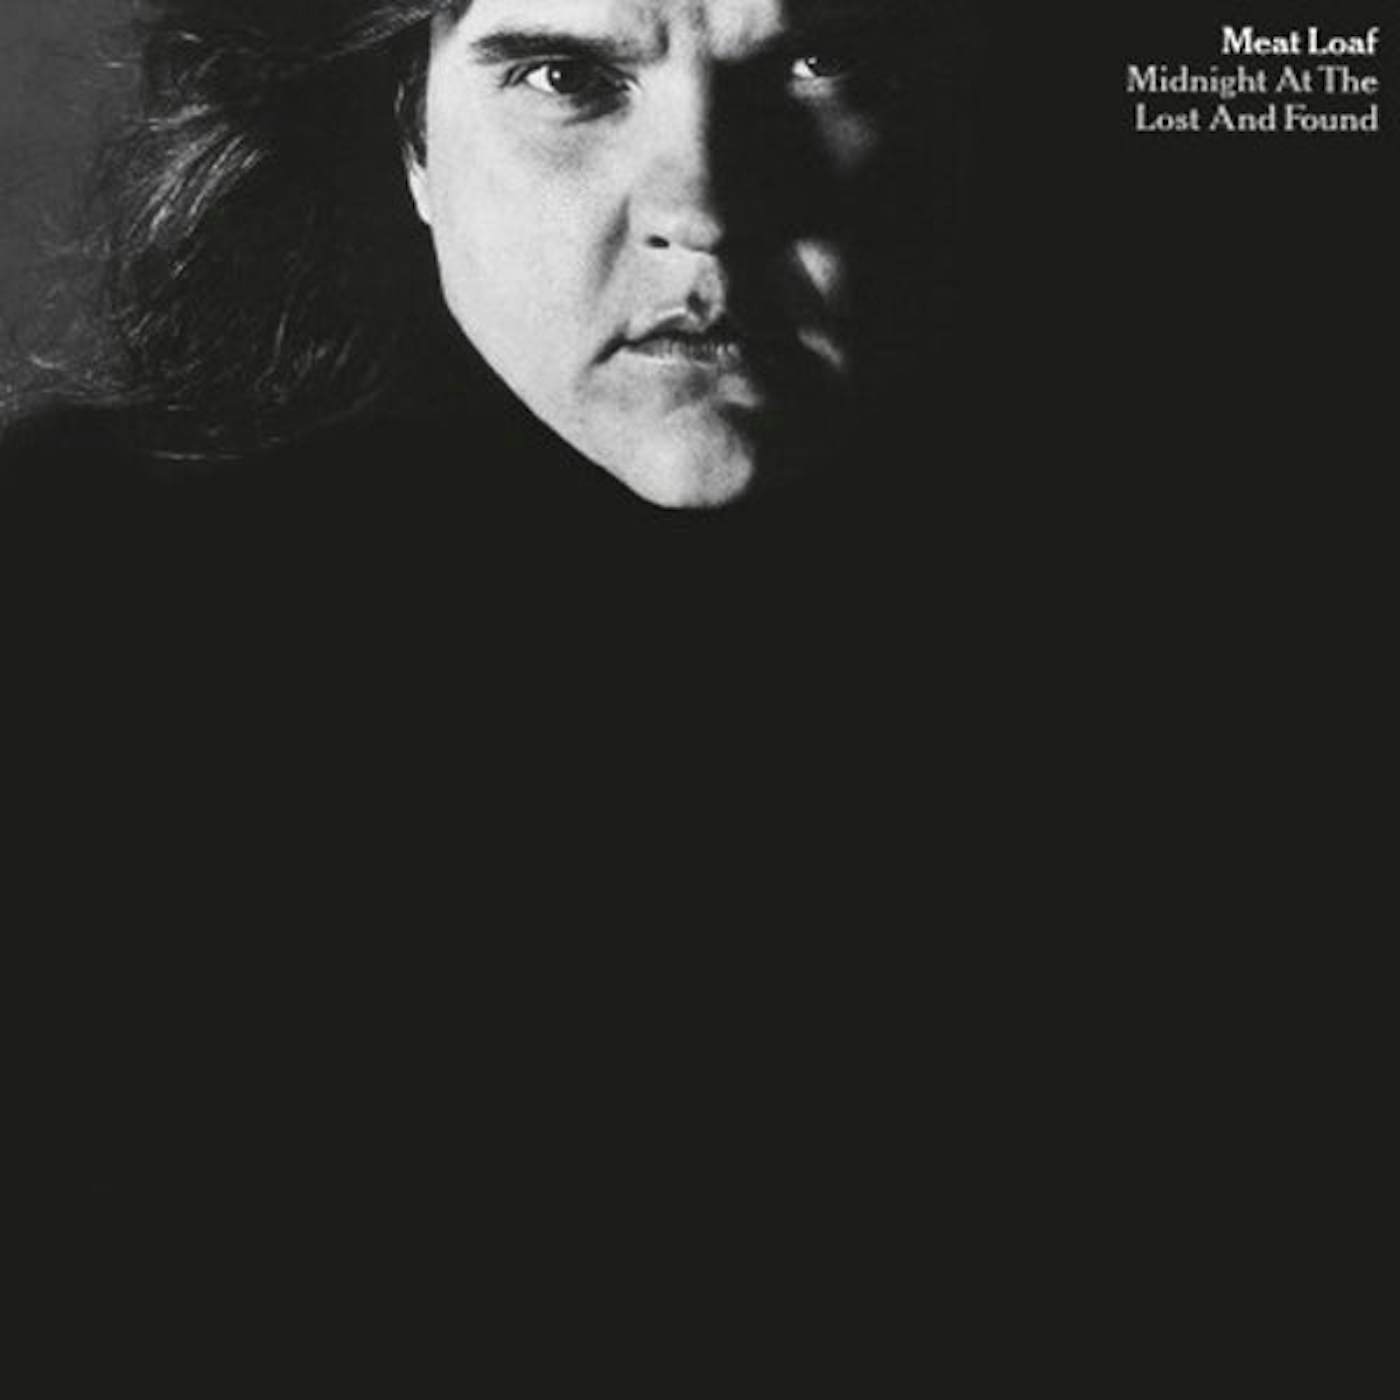 Meat Loaf LP - Midnight At The Lost And Found (Coloured) (Vinyl)